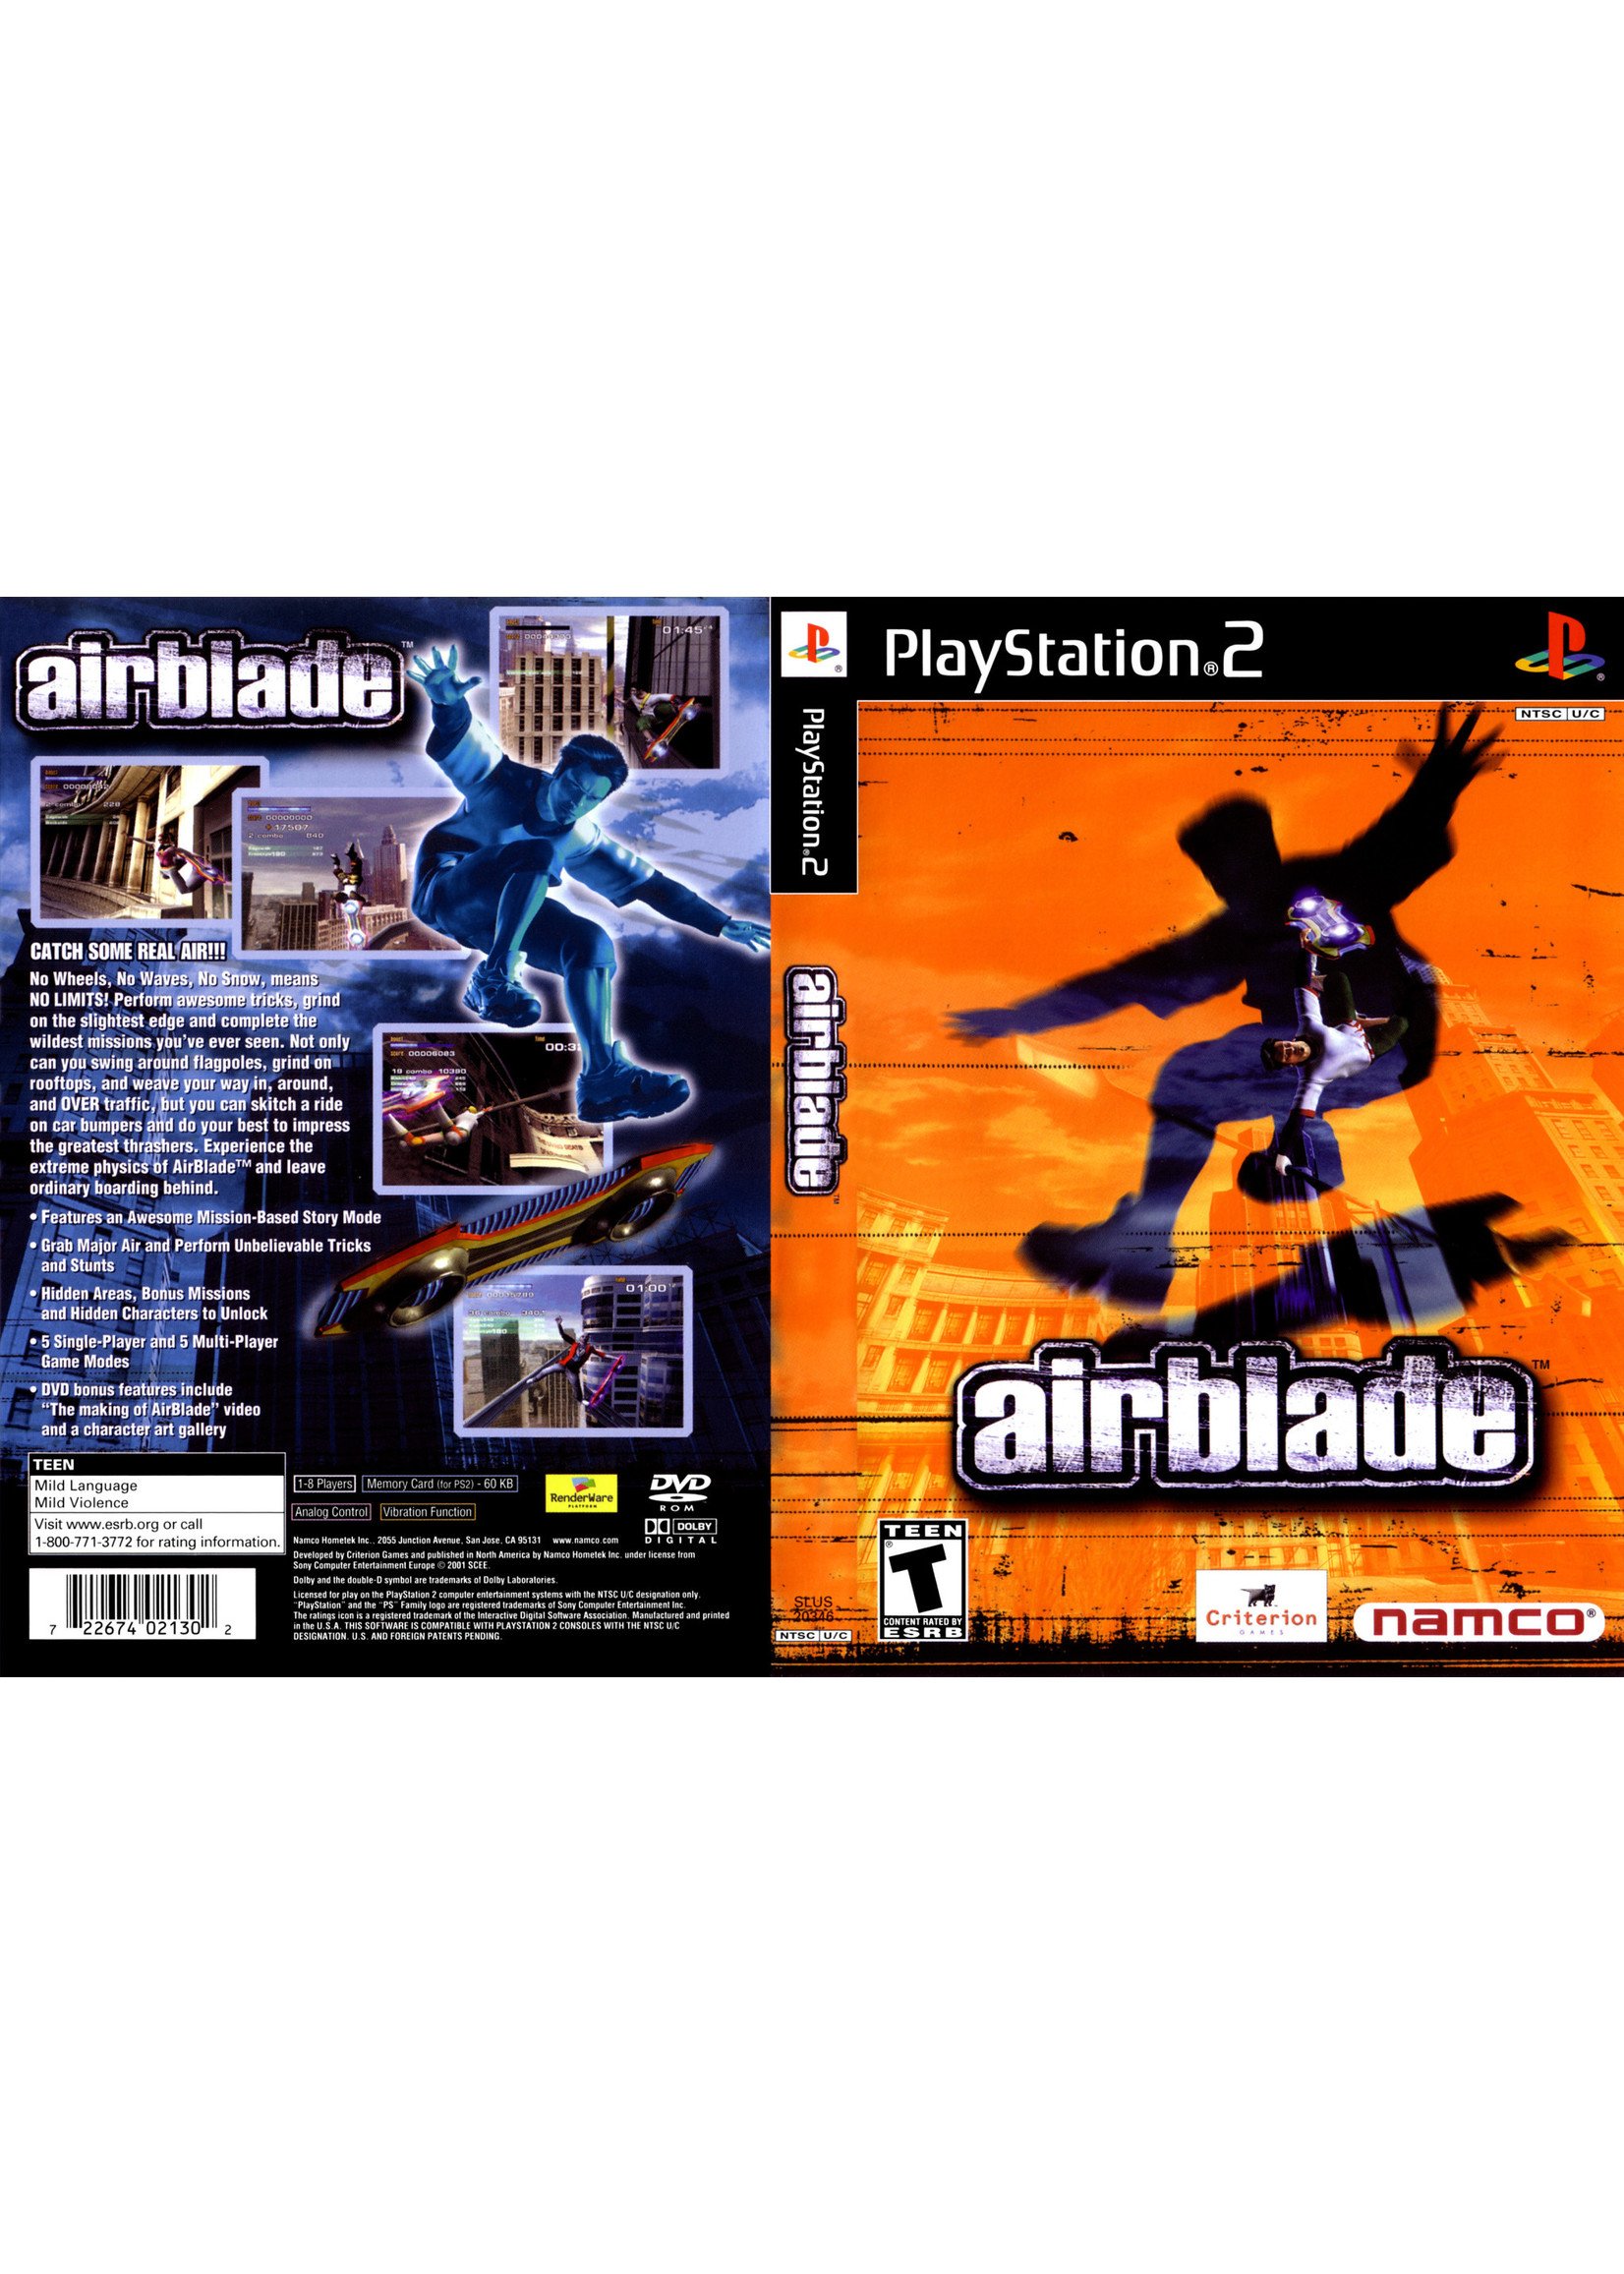 Sony Playstation 2 (PS2) Airblade